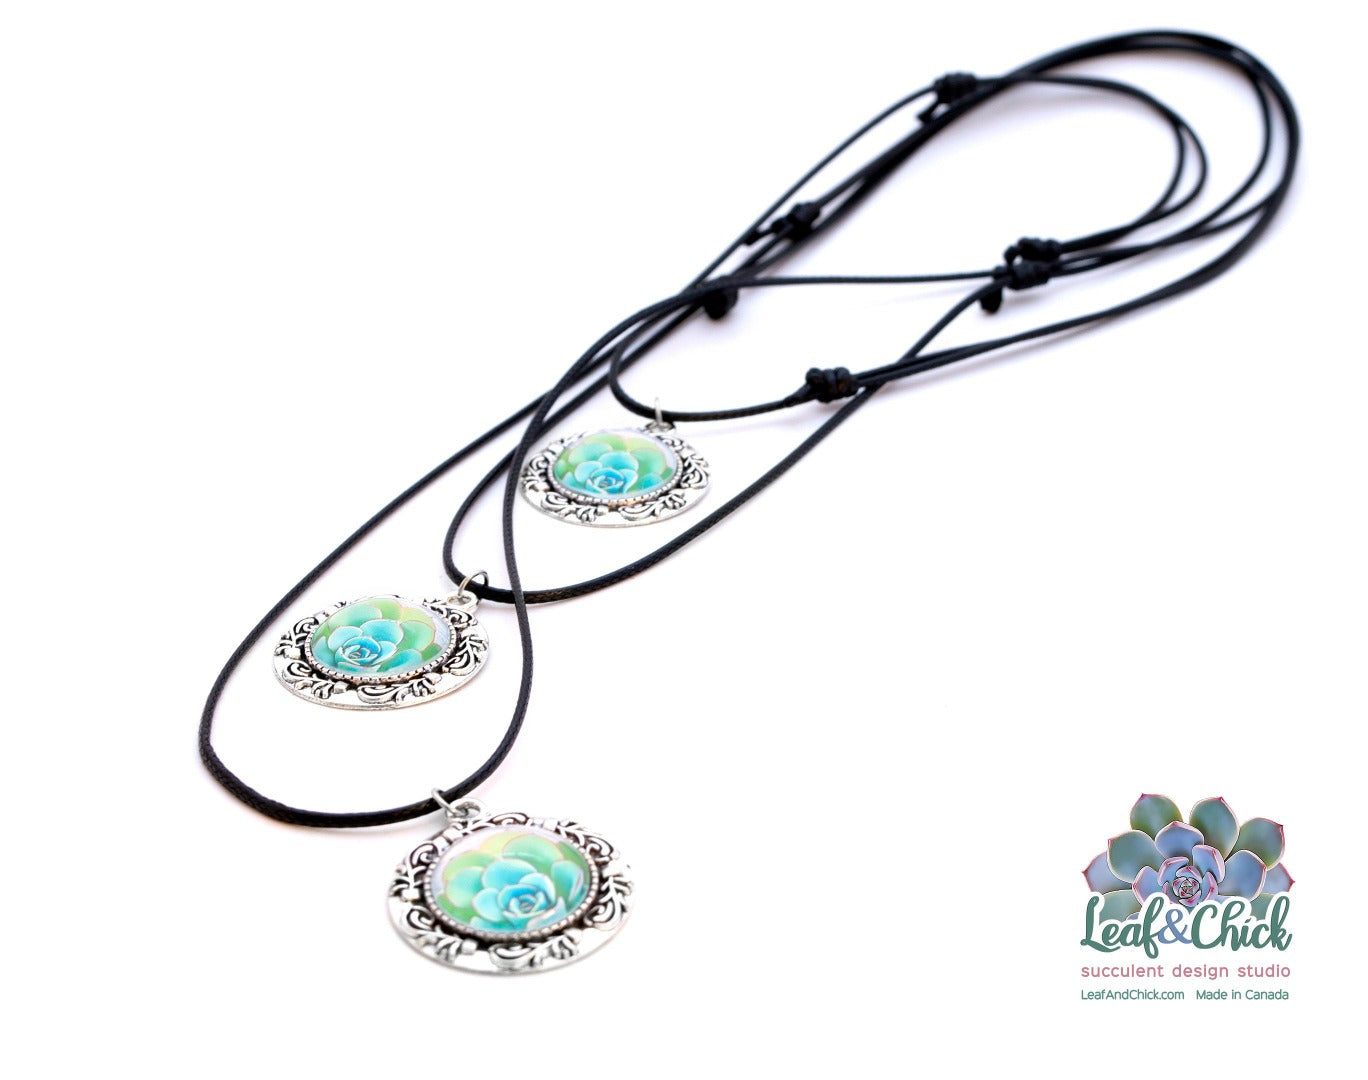 three succulent pendants with stylized echeveria in an ornamental setting